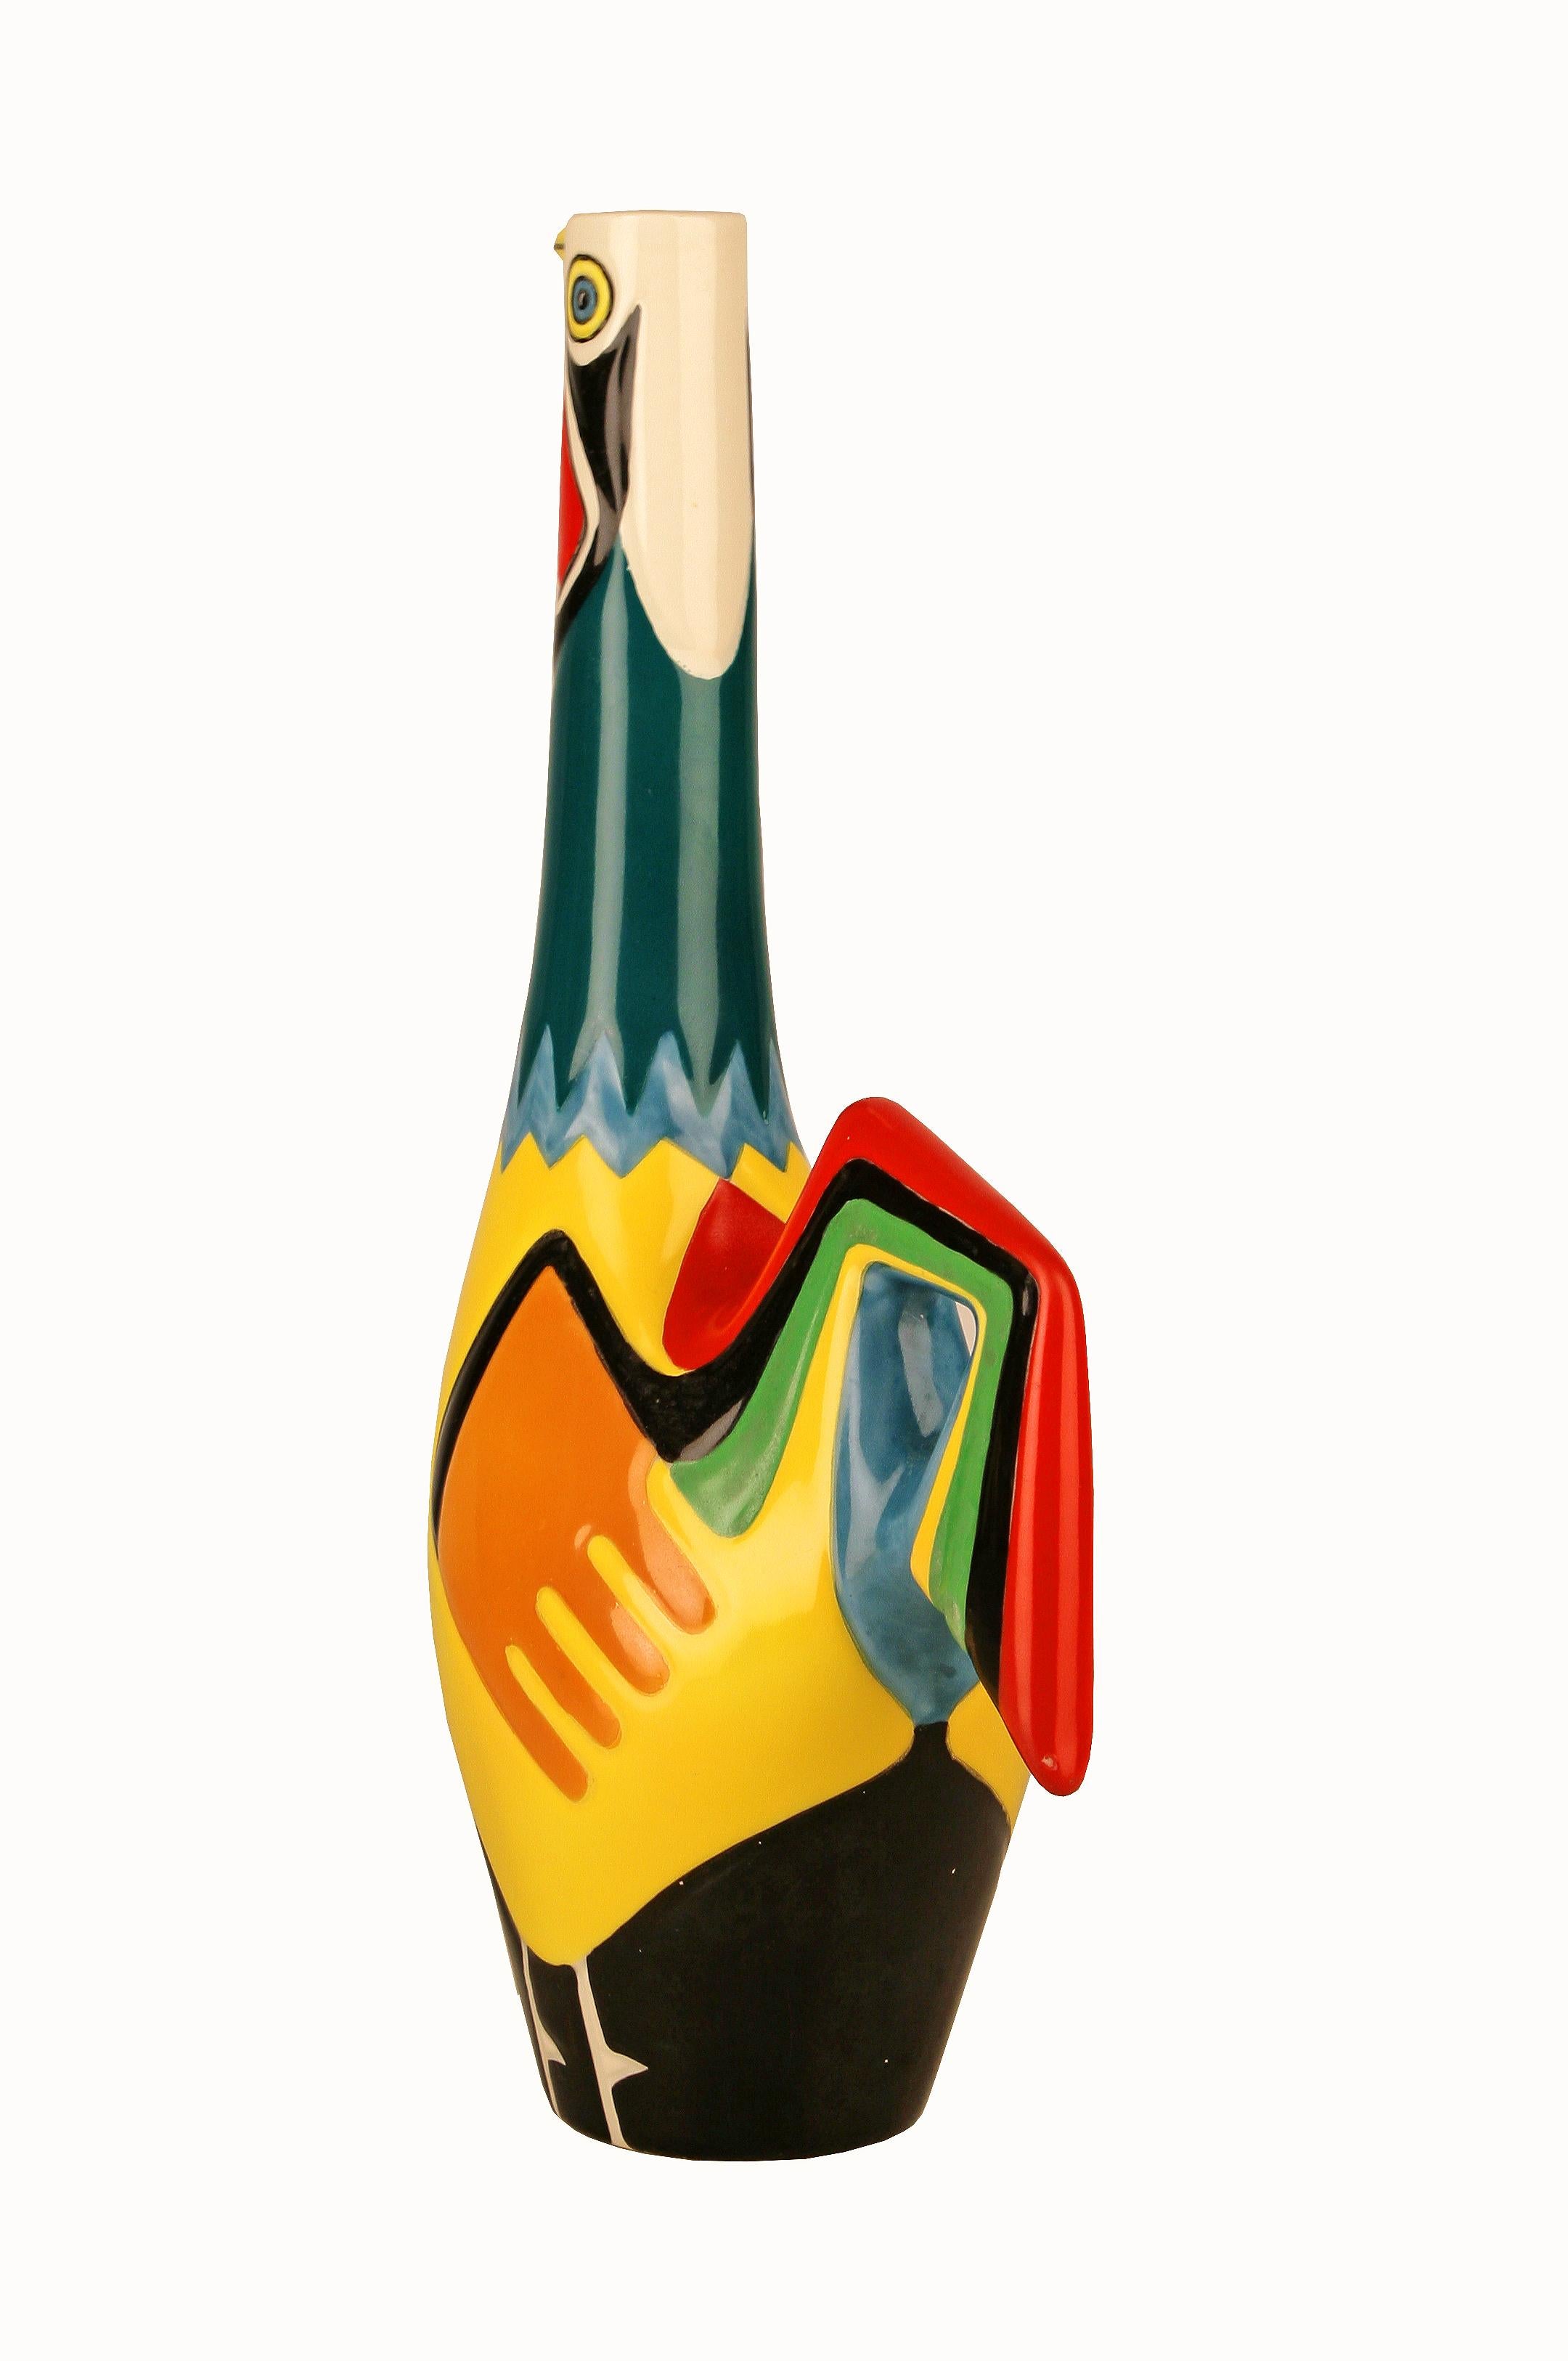 Mid-Century Modern Portuguese Colorful Enameled Ceramic Rooster Decanter/Pitcher by Real Vinícola